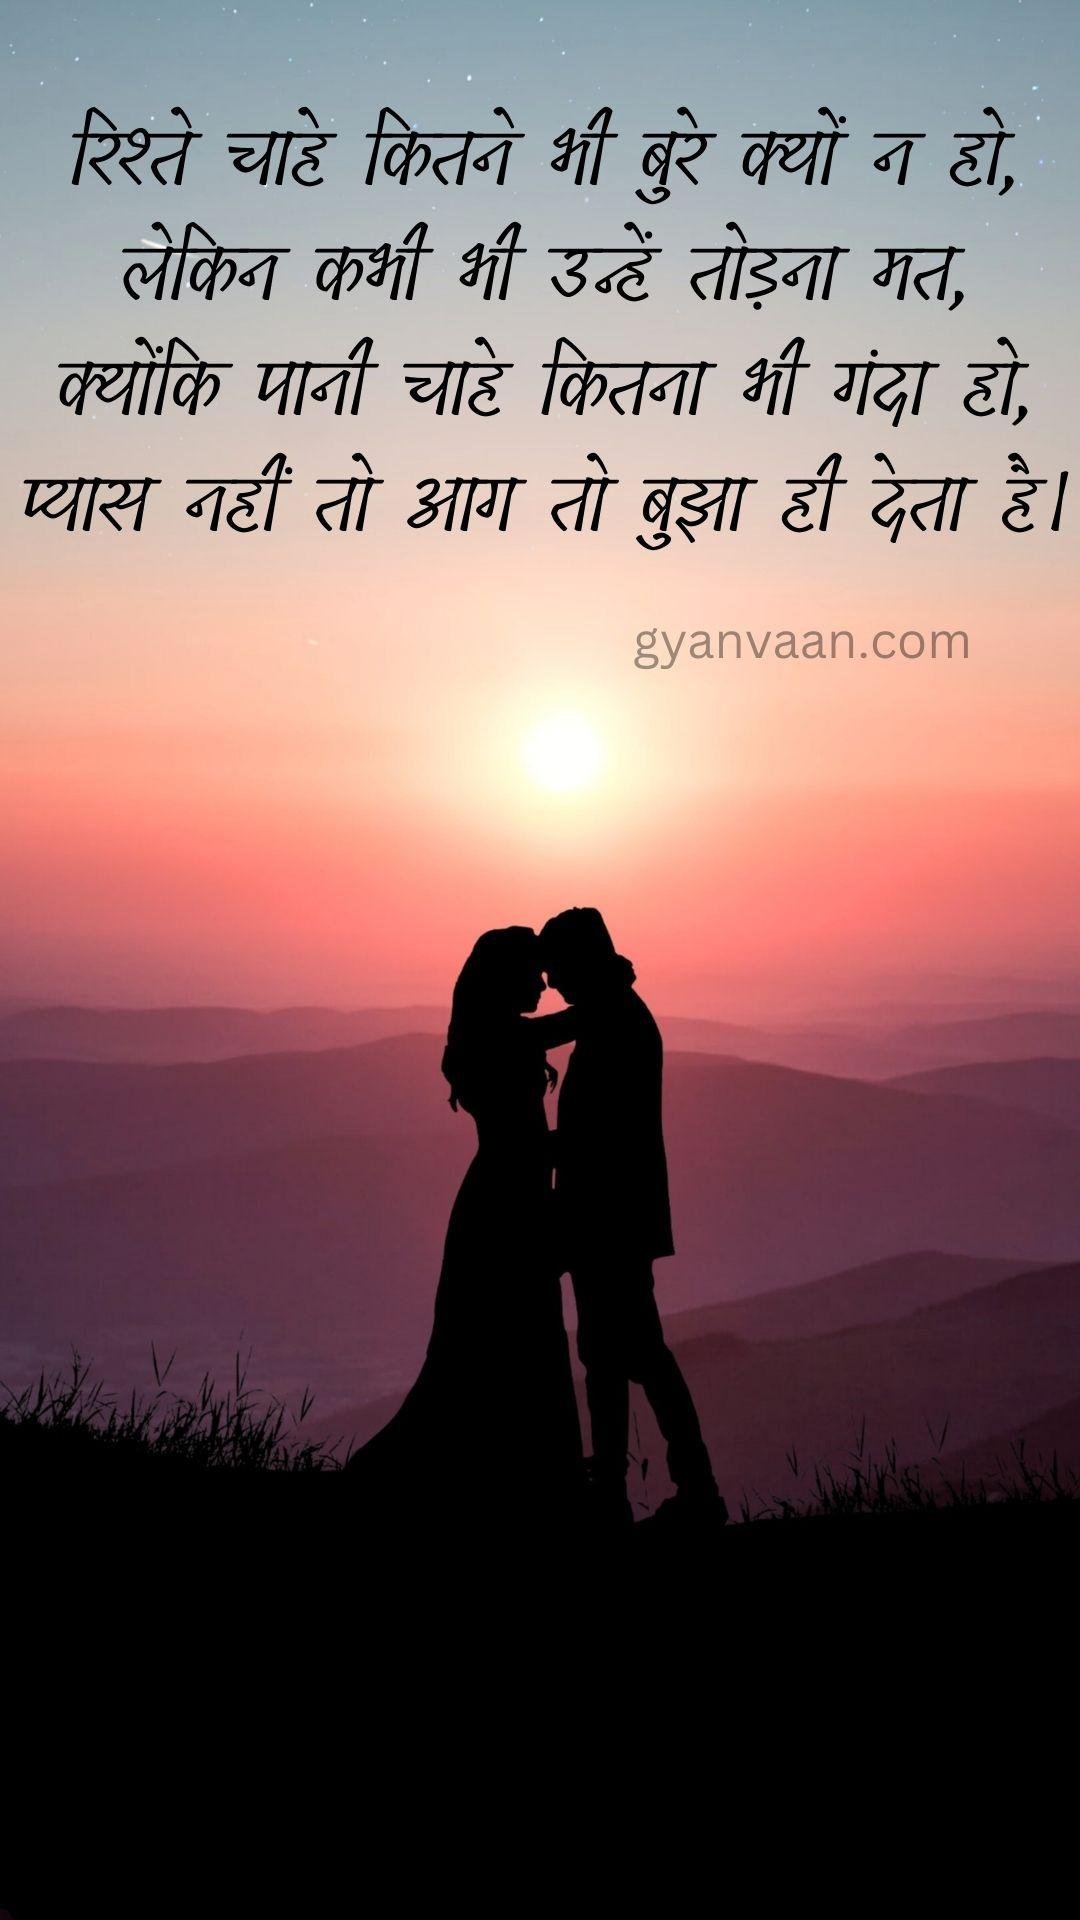 Very Heart Touching Sad Quotes In Hindi For Mobile Devices 5 - Very Heart Touching Sad Quotes In Hindi